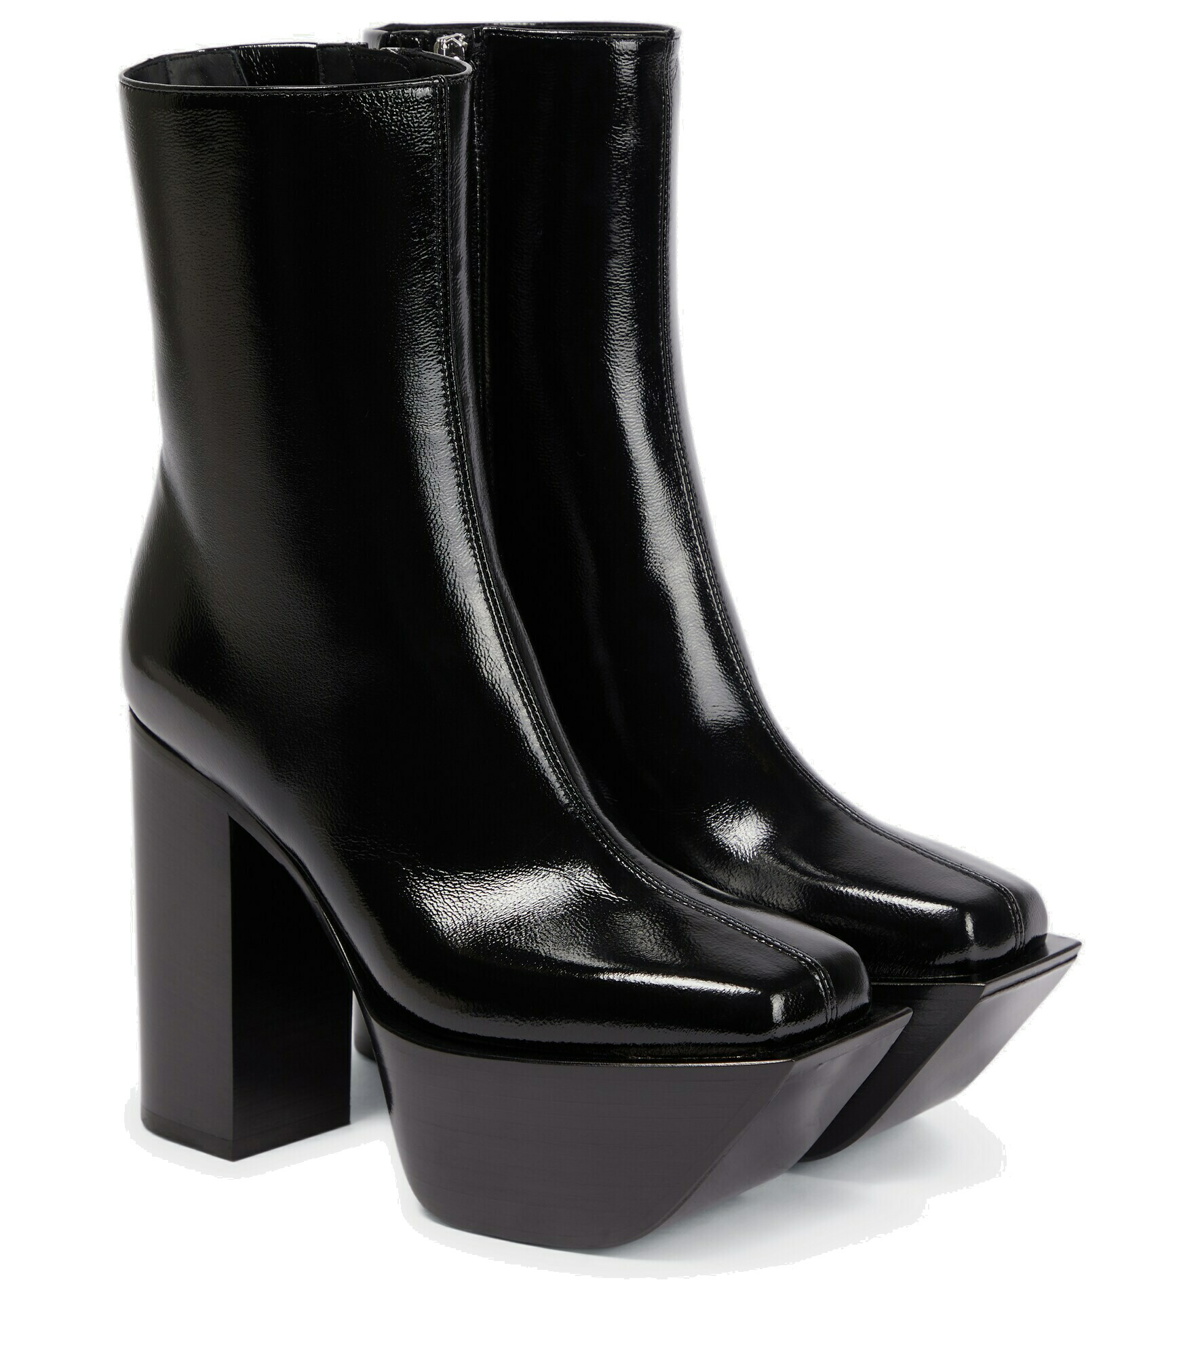 Peter Do - Metal-trimmed leather ankle boots Peter Do